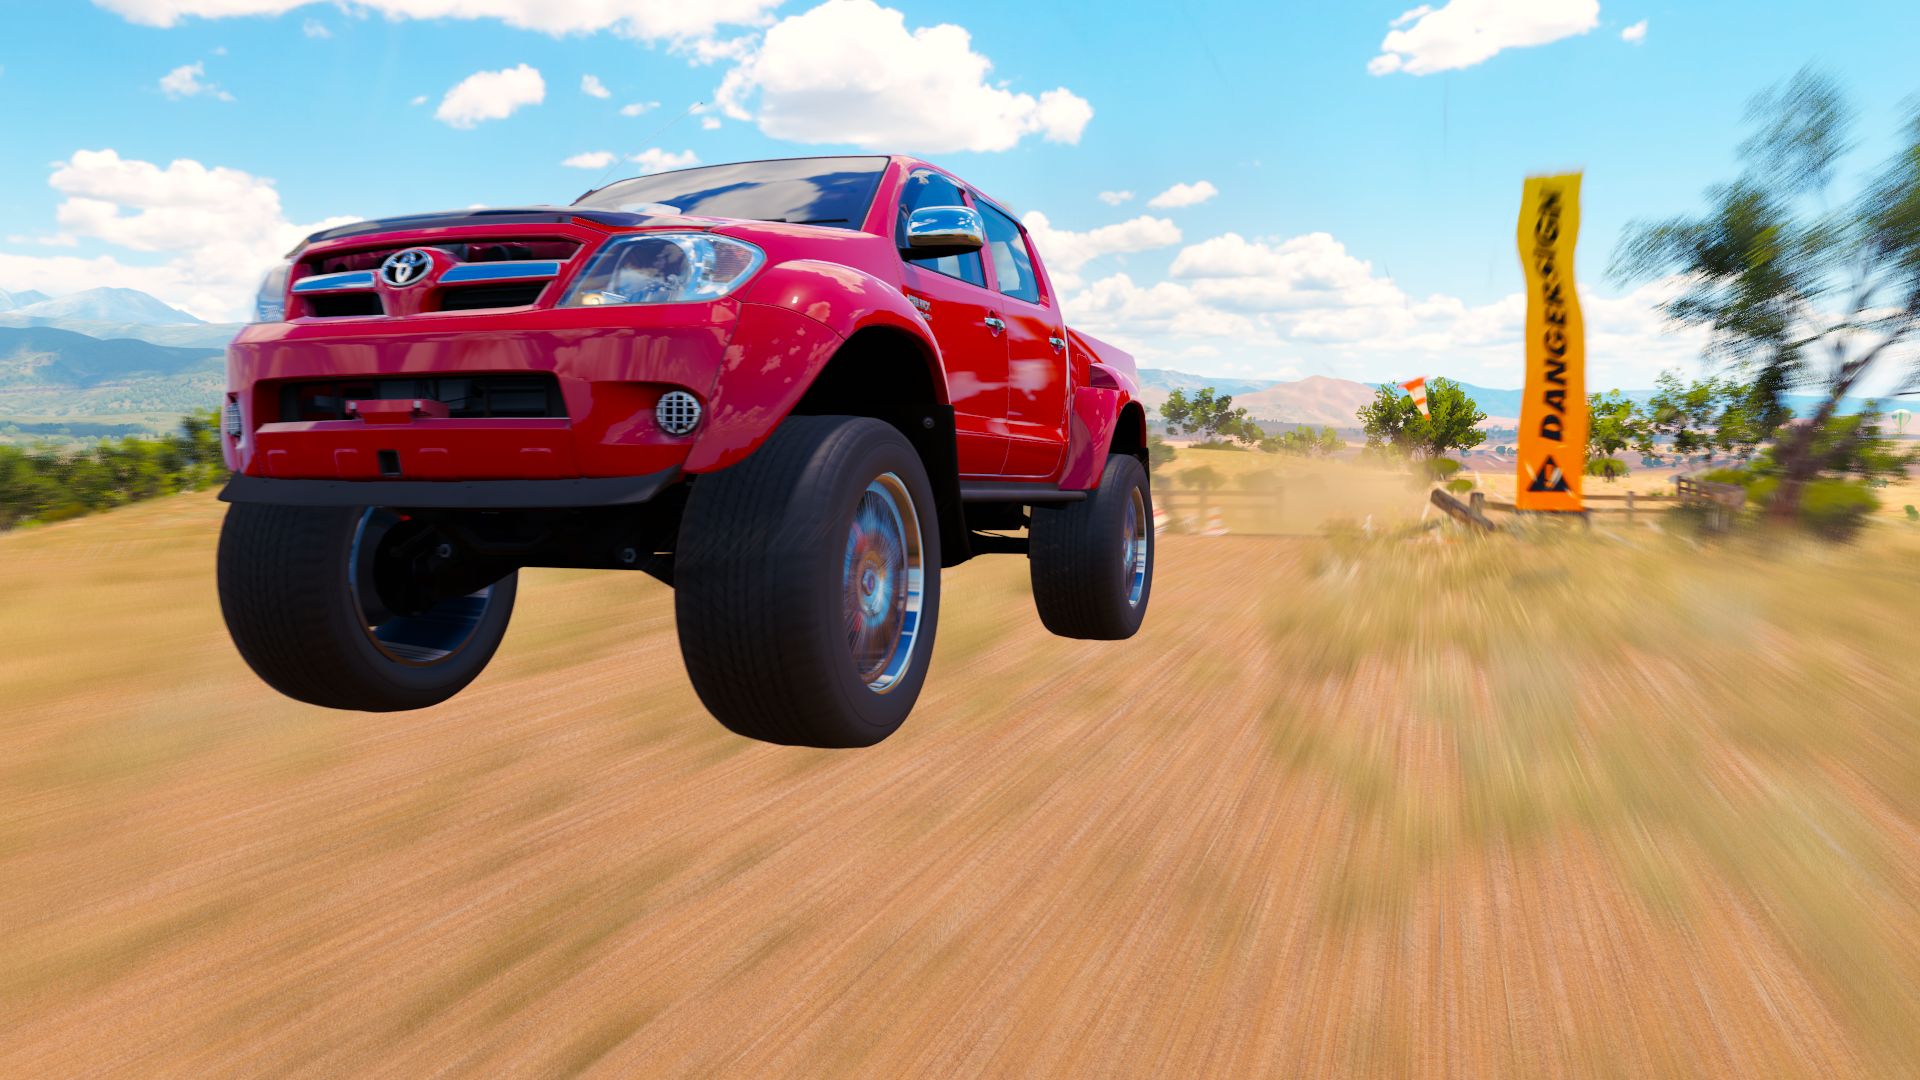 Toyota monster jump HD Wallpaper | Background Image | 1920x1080 | ID